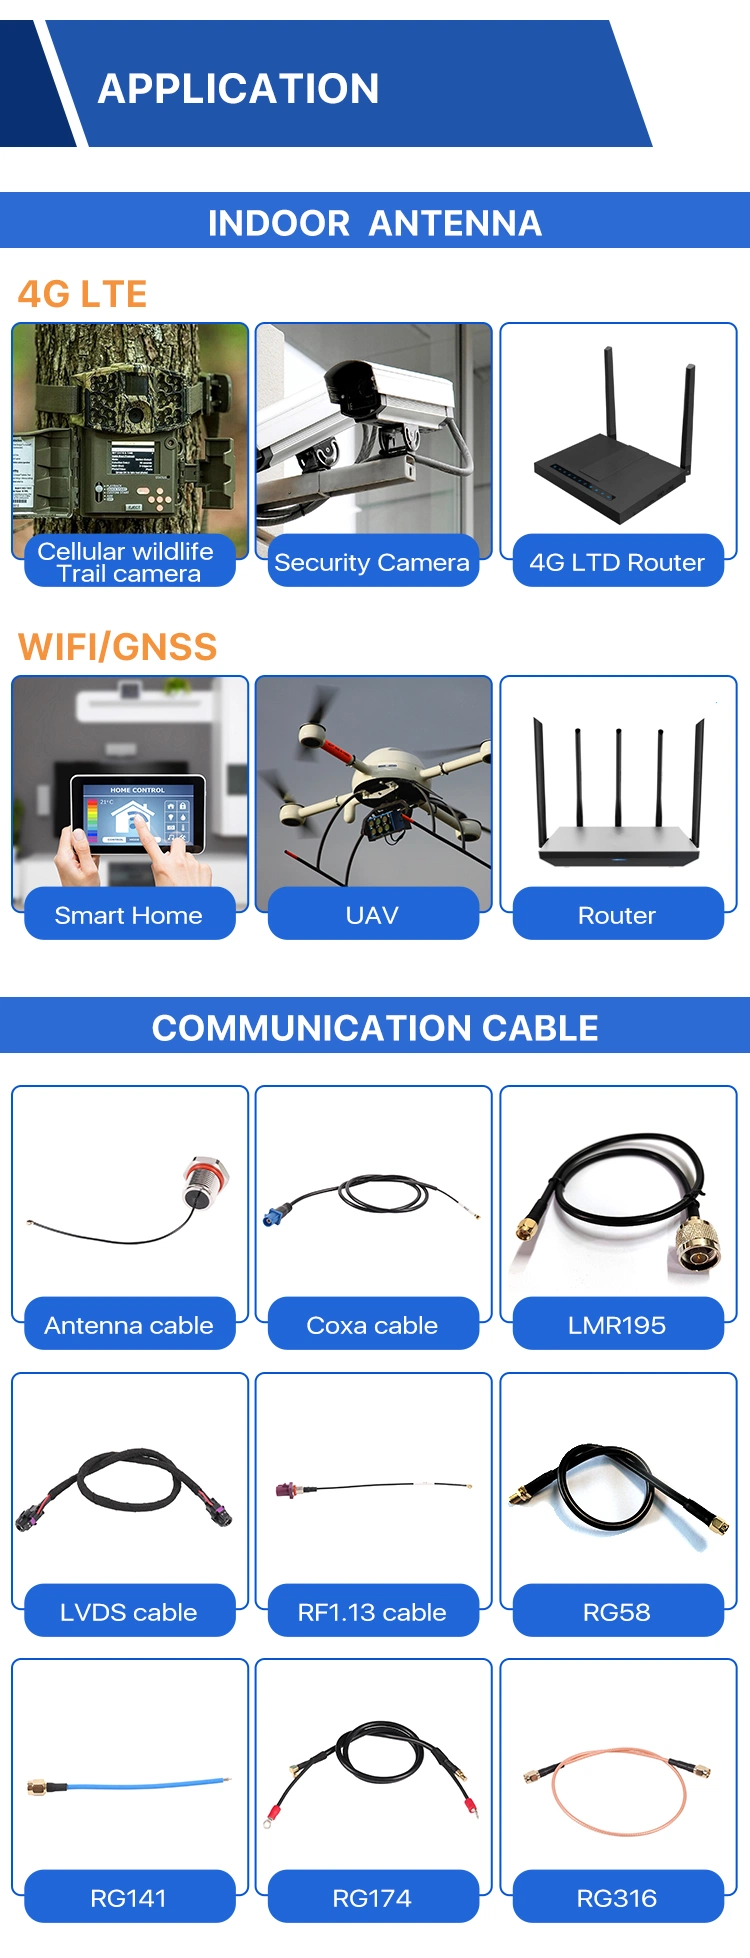 7dBi WiFi 868MHz Helium Miner FRP Antenna for Communications